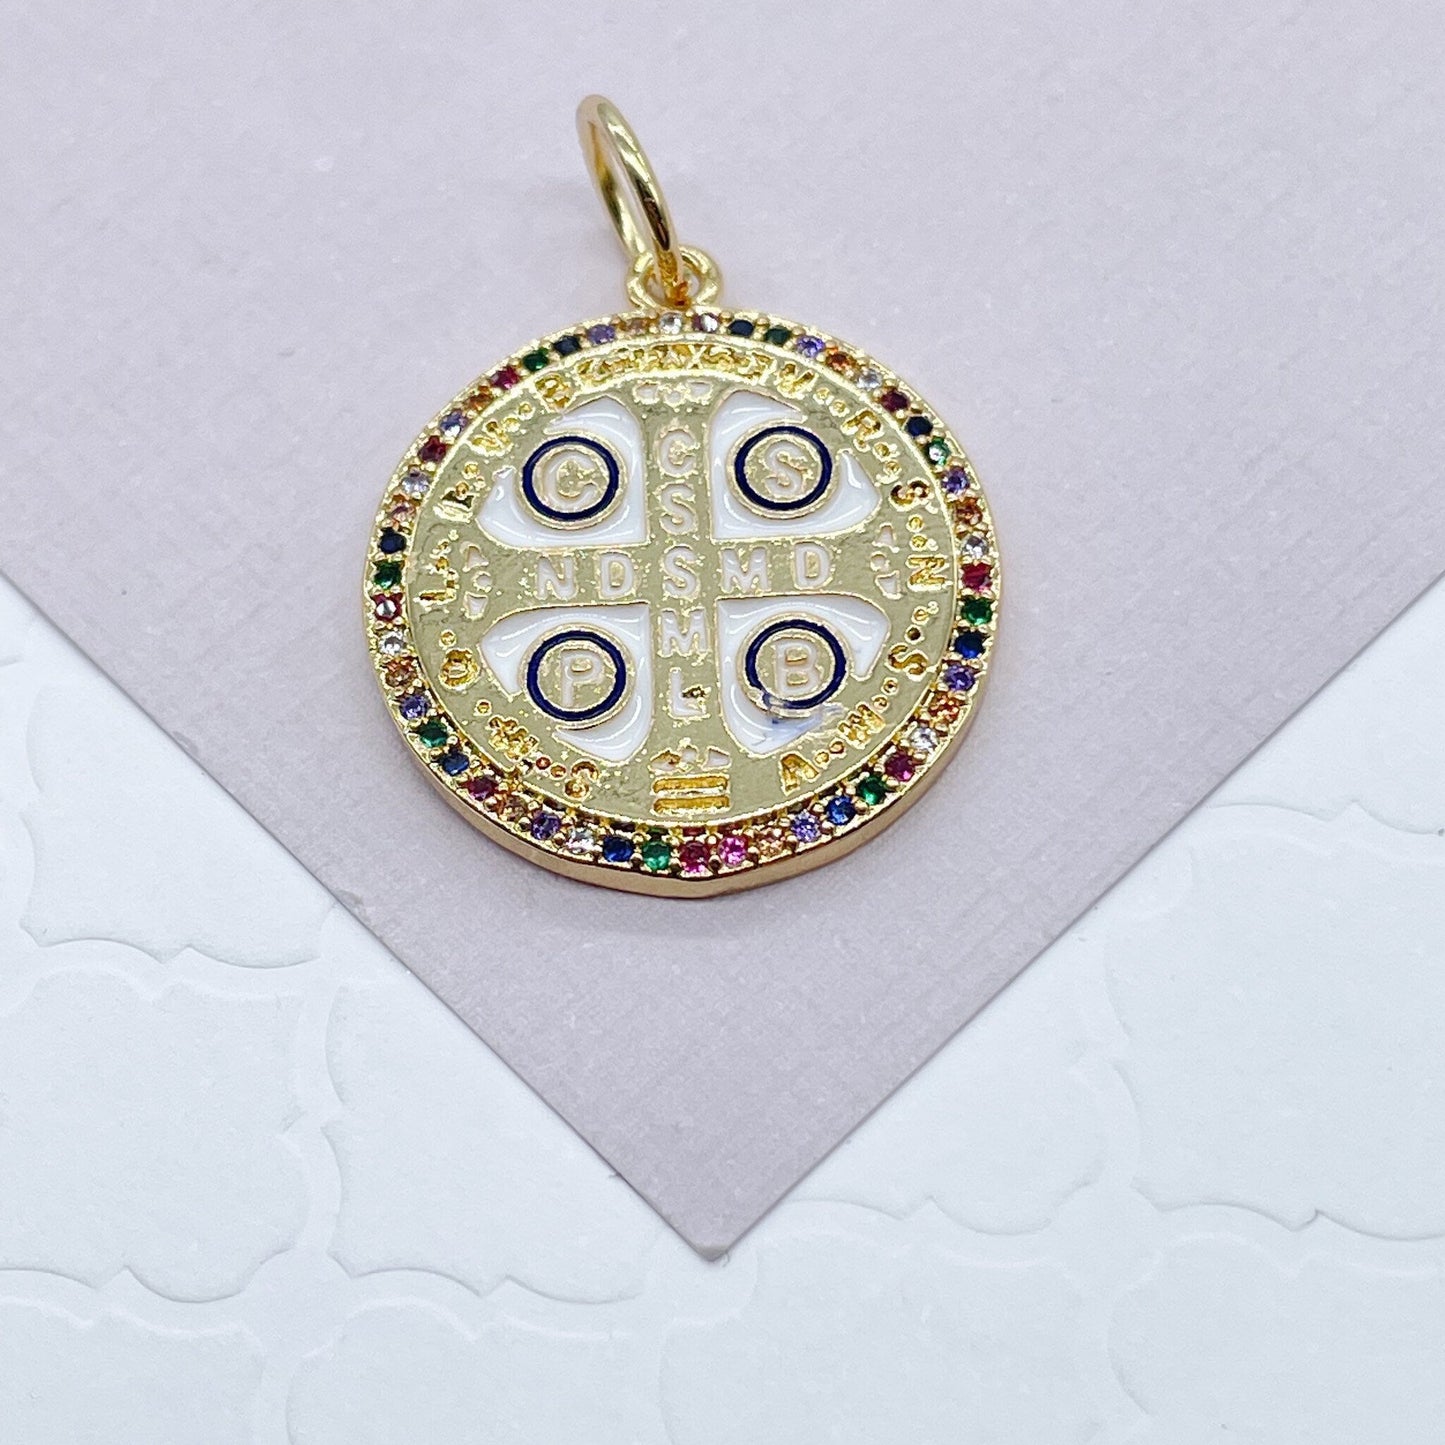 18k Gold Layered Colorful Enamel Saint Benedict Cross Pendant For Protection